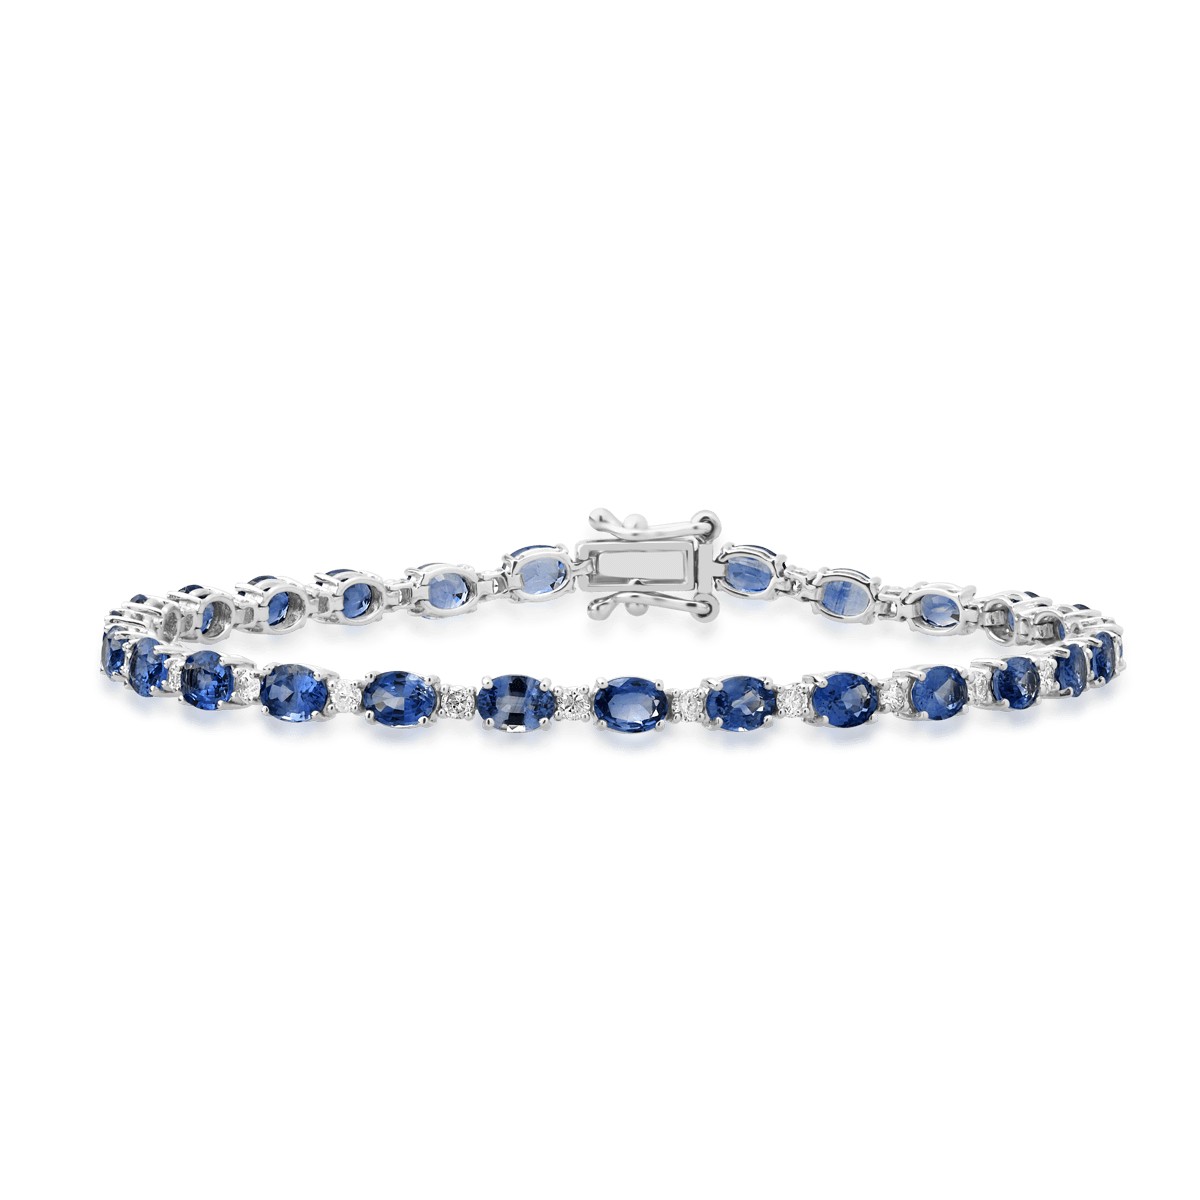 18K white gold tennis bracelet with light blue sapphire of 5.75ct and diamonds of 0.6ct